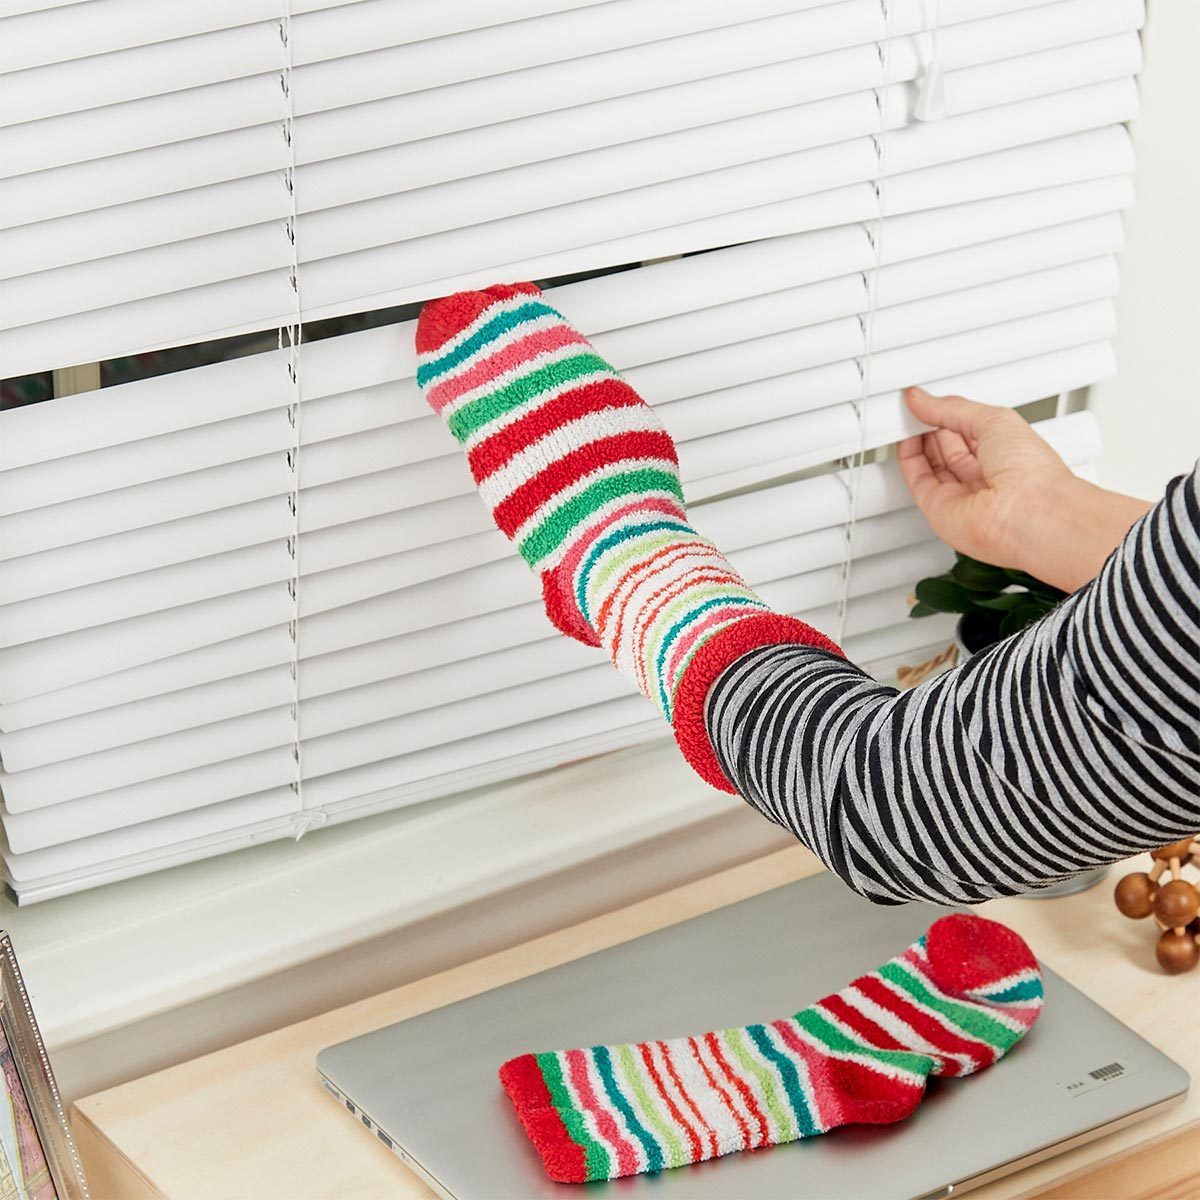 sock to clean window blinds